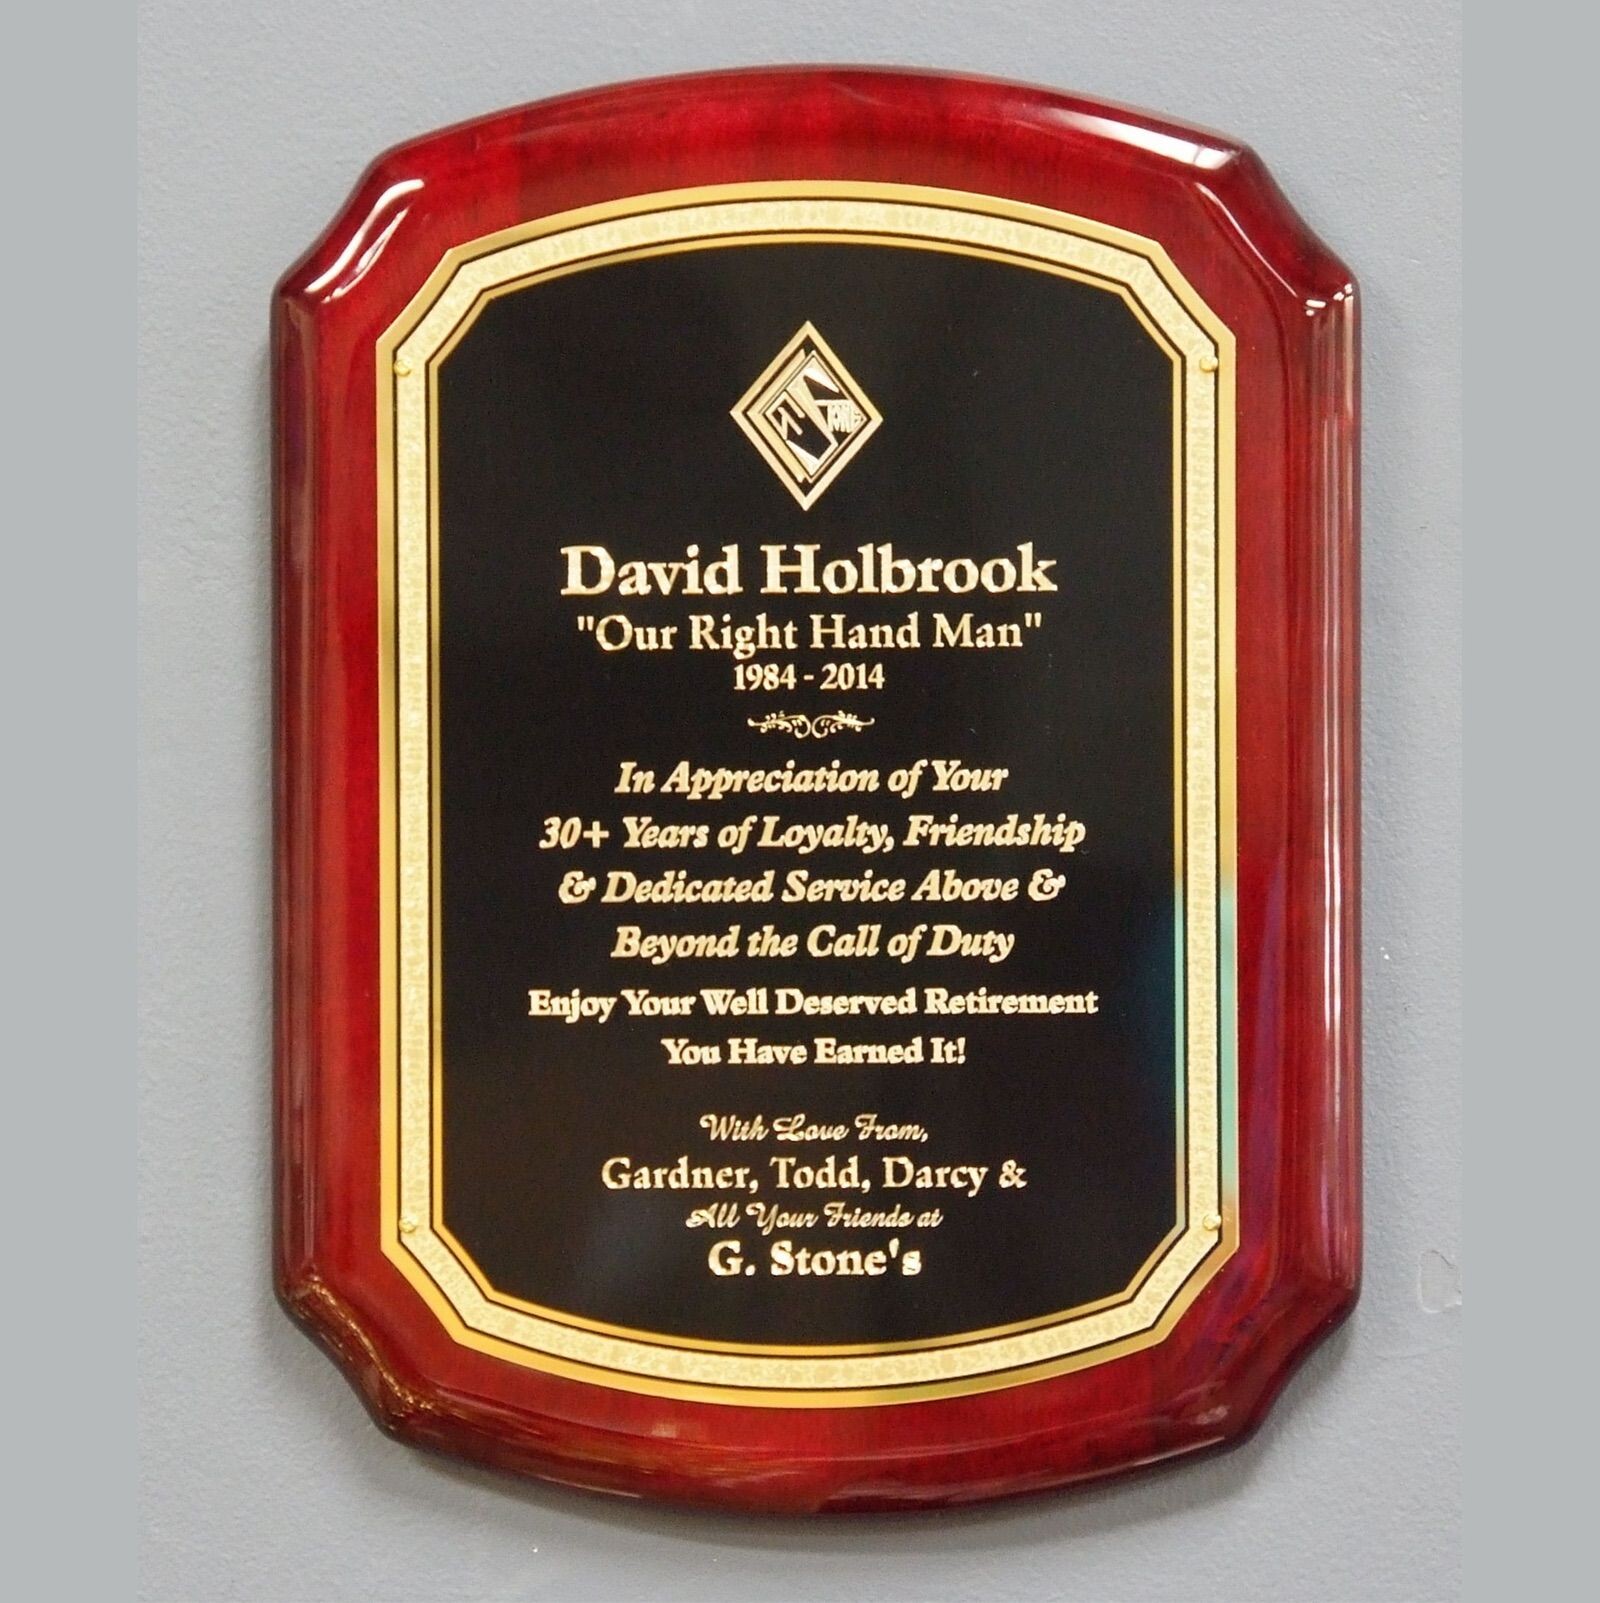 rosewood arched plaque with scalloped corners 10.5 x 13 piano finish with standard engraving